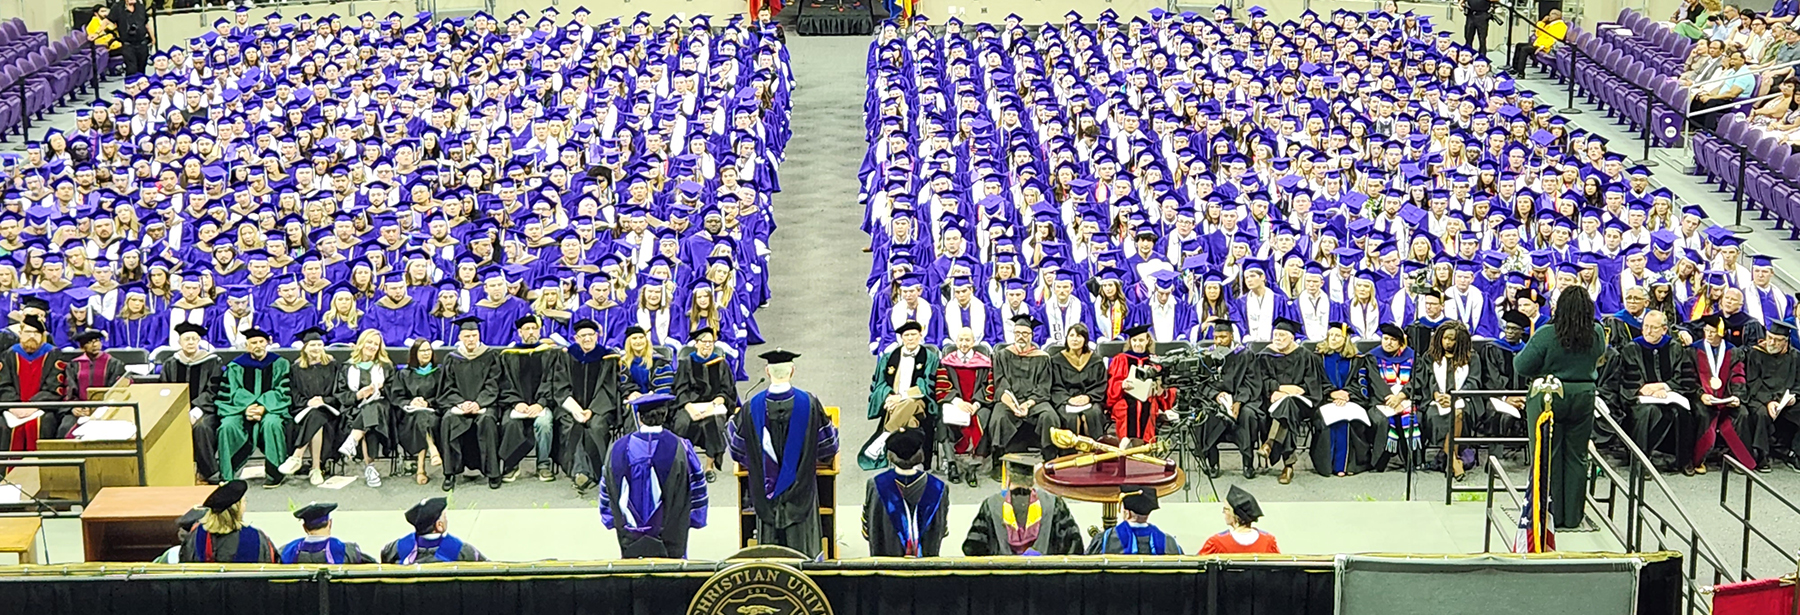 Section Image: Neeley Graduates during the ceremony 